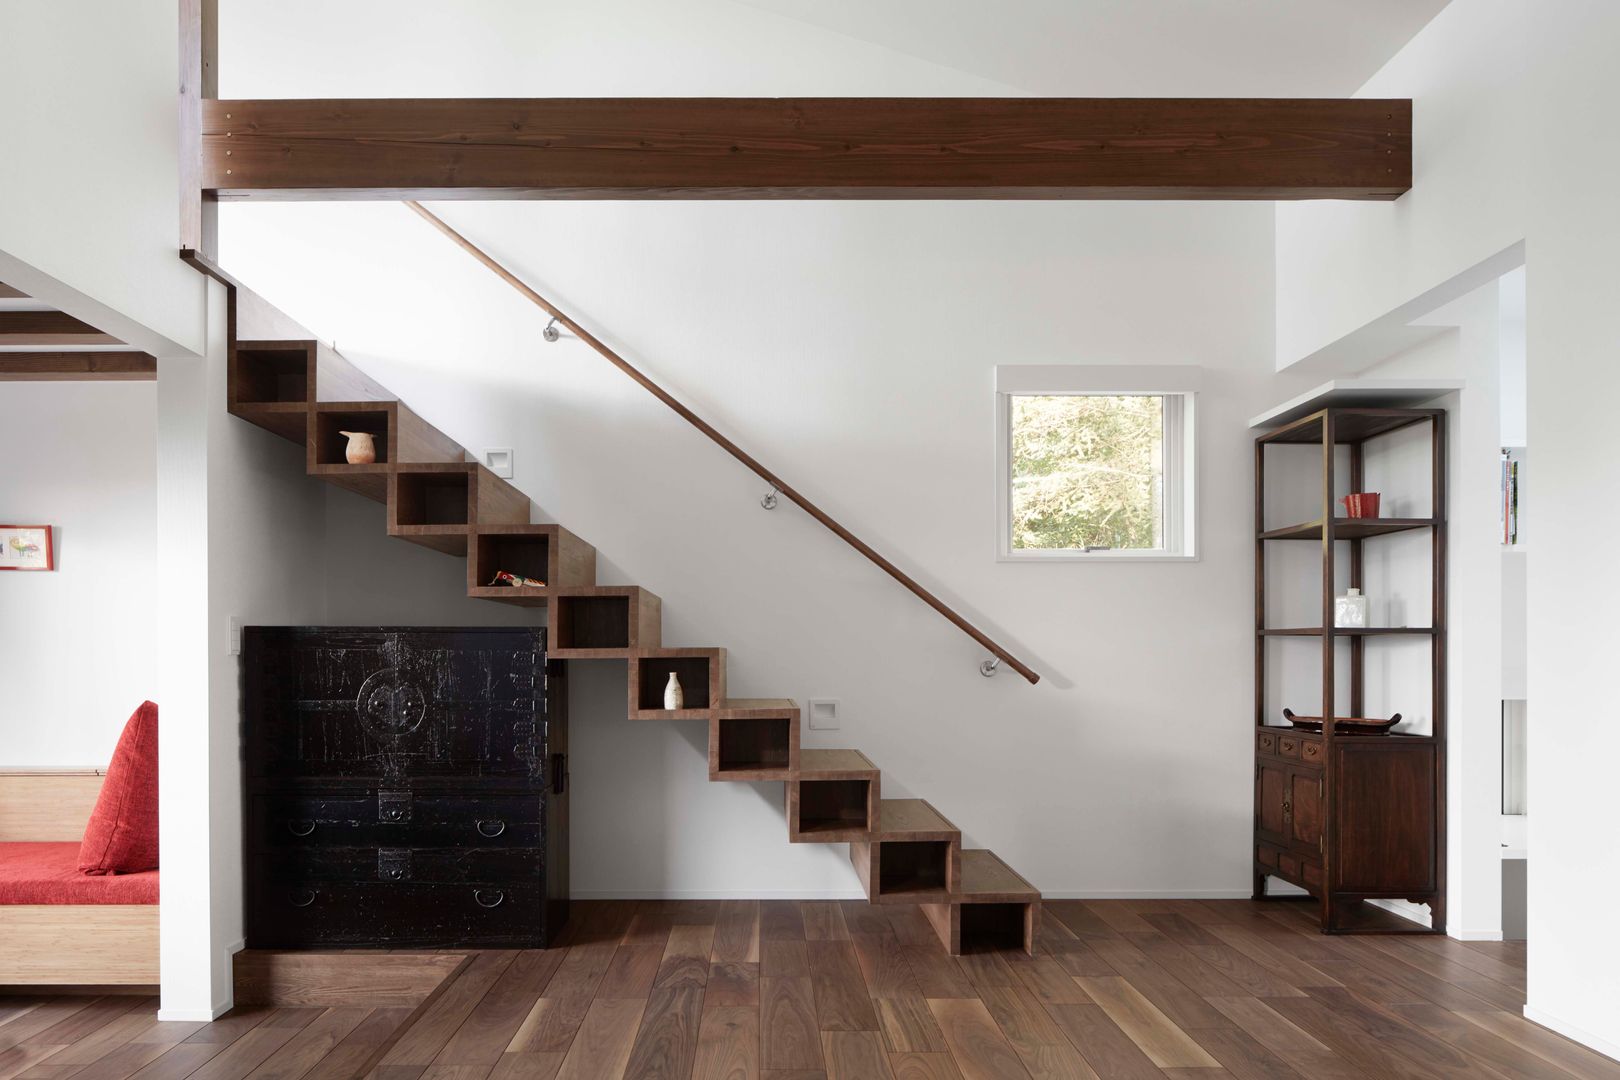 Cantilevered staircase structure 久保田章敬建築研究所 Modern corridor, hallway & stairs Wood Wood effect chest of drawers,laminated wood